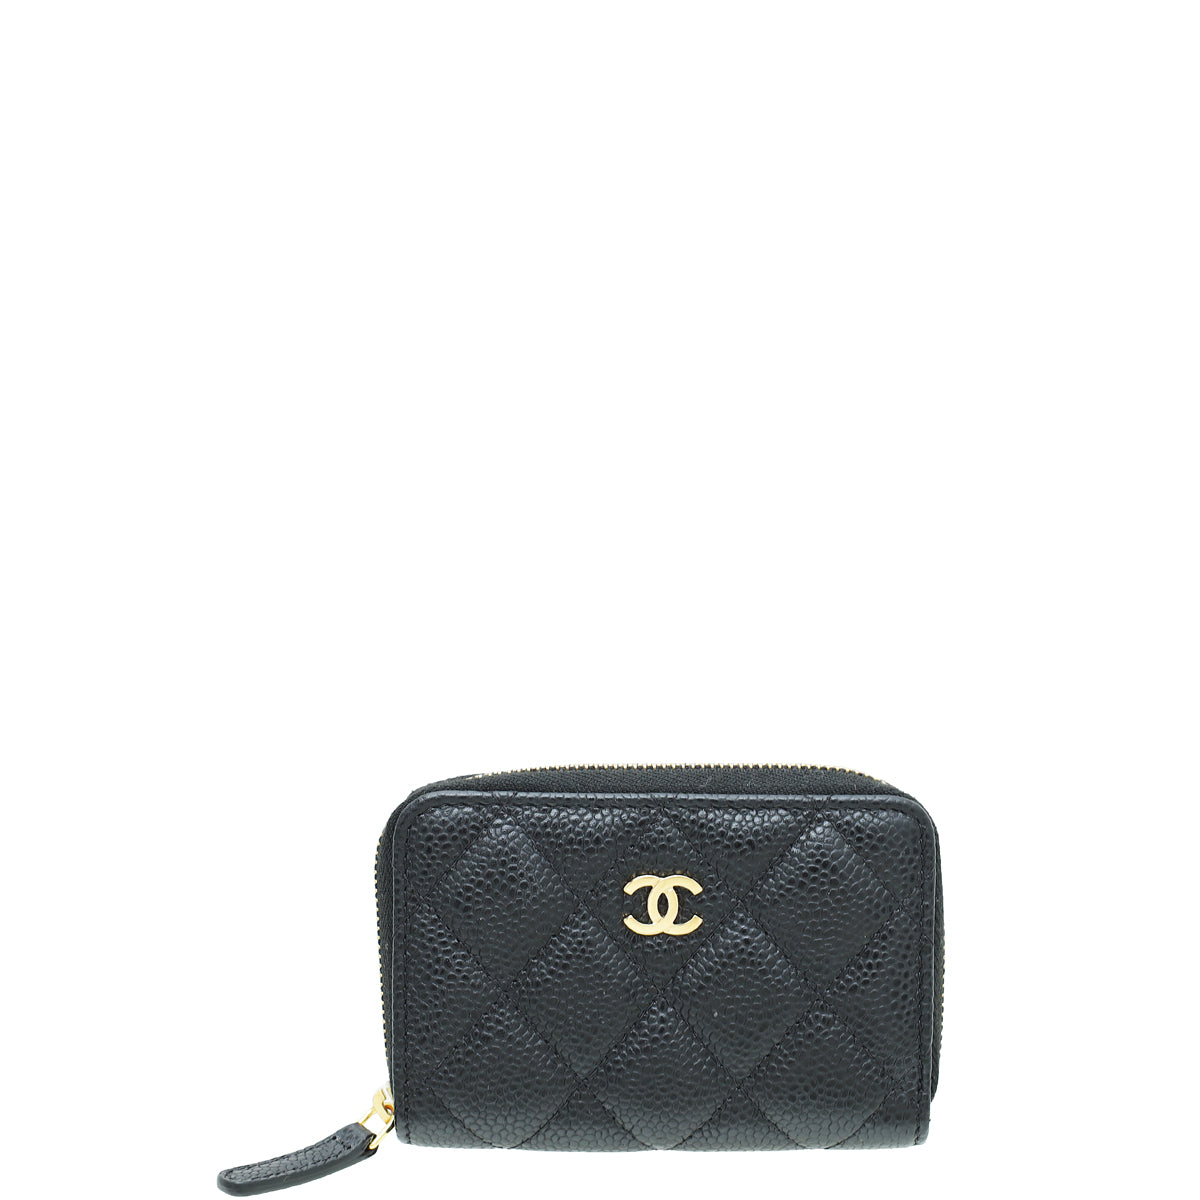 Chanel Black CC Classic Zip Small Coin Purse Wallet